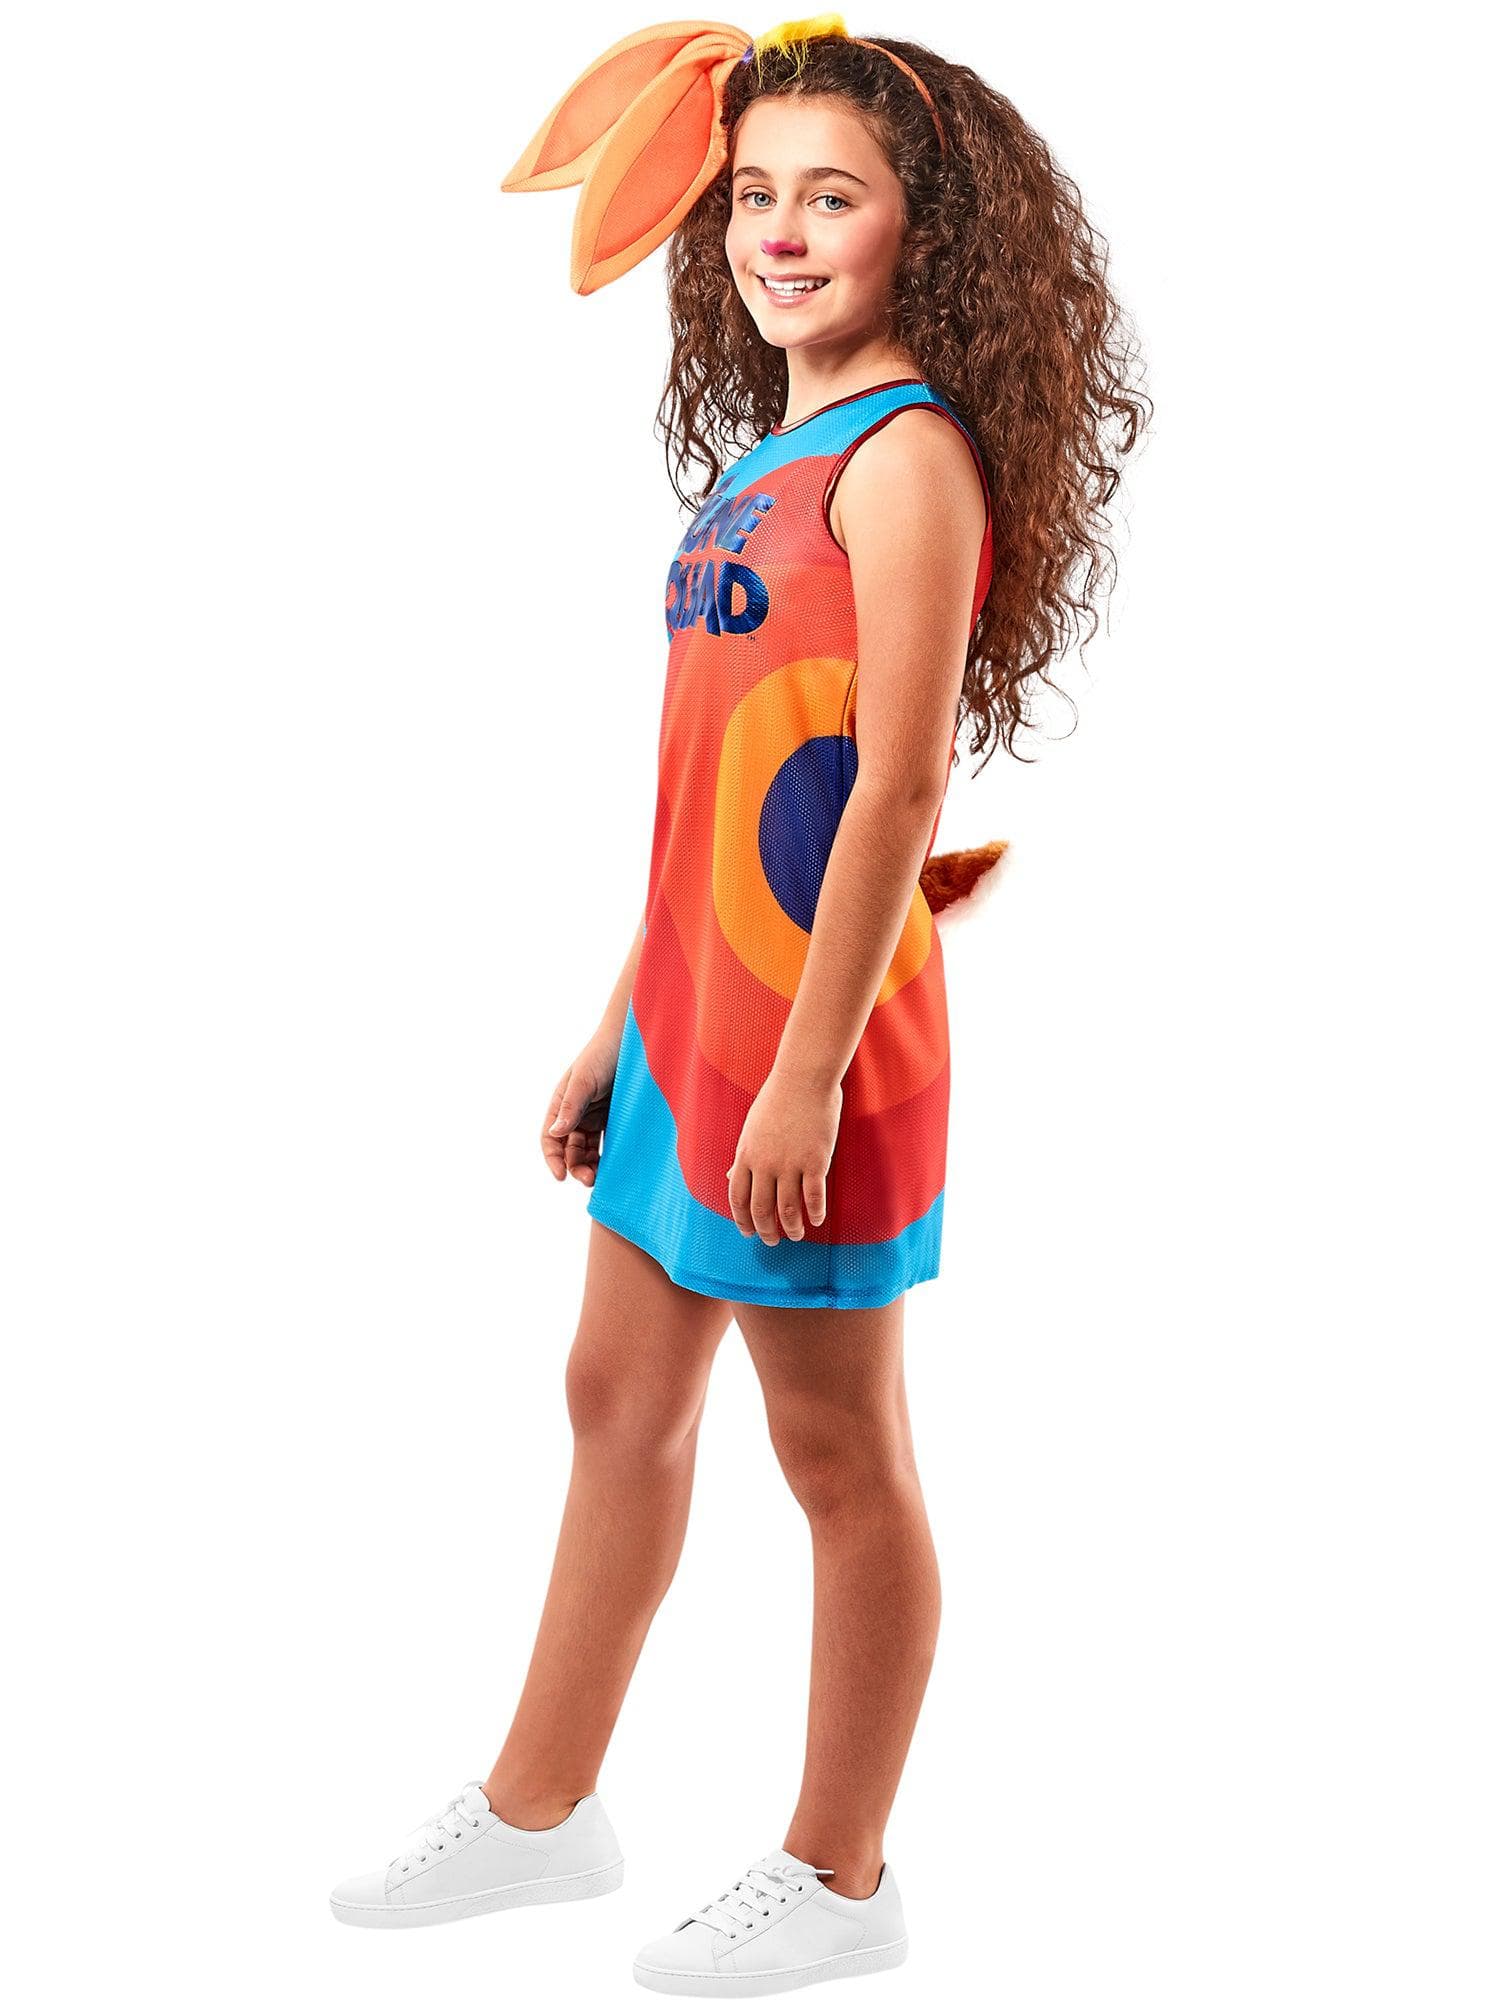 Kids' Space Jam: A New Legacy Lola Bunny Costume - costumes.com